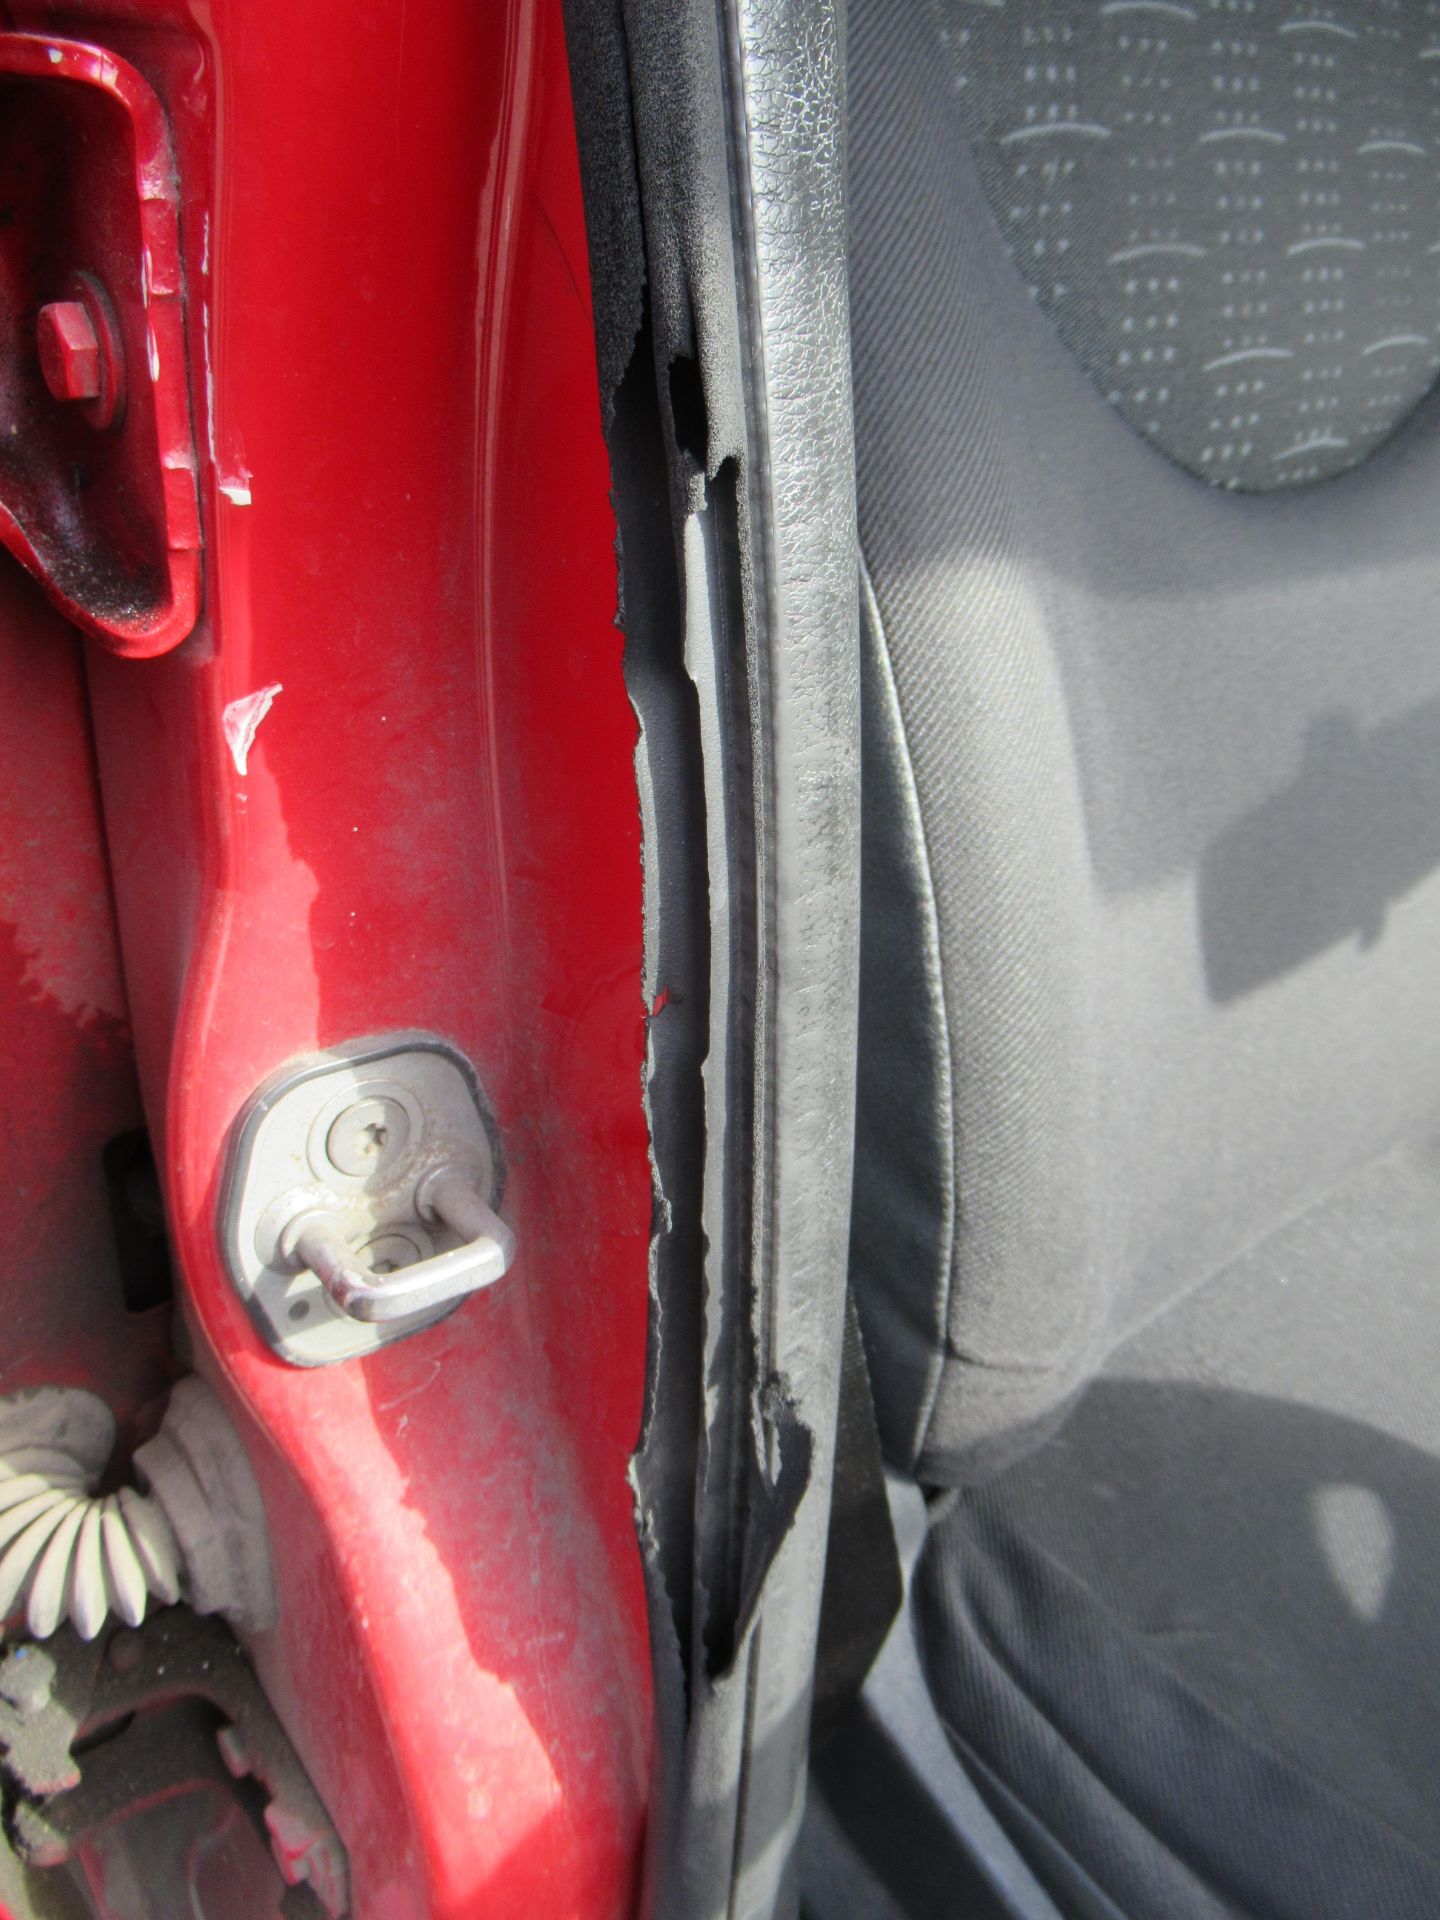 2008 RED CITROEN C3 VIBE - Image 37 of 40